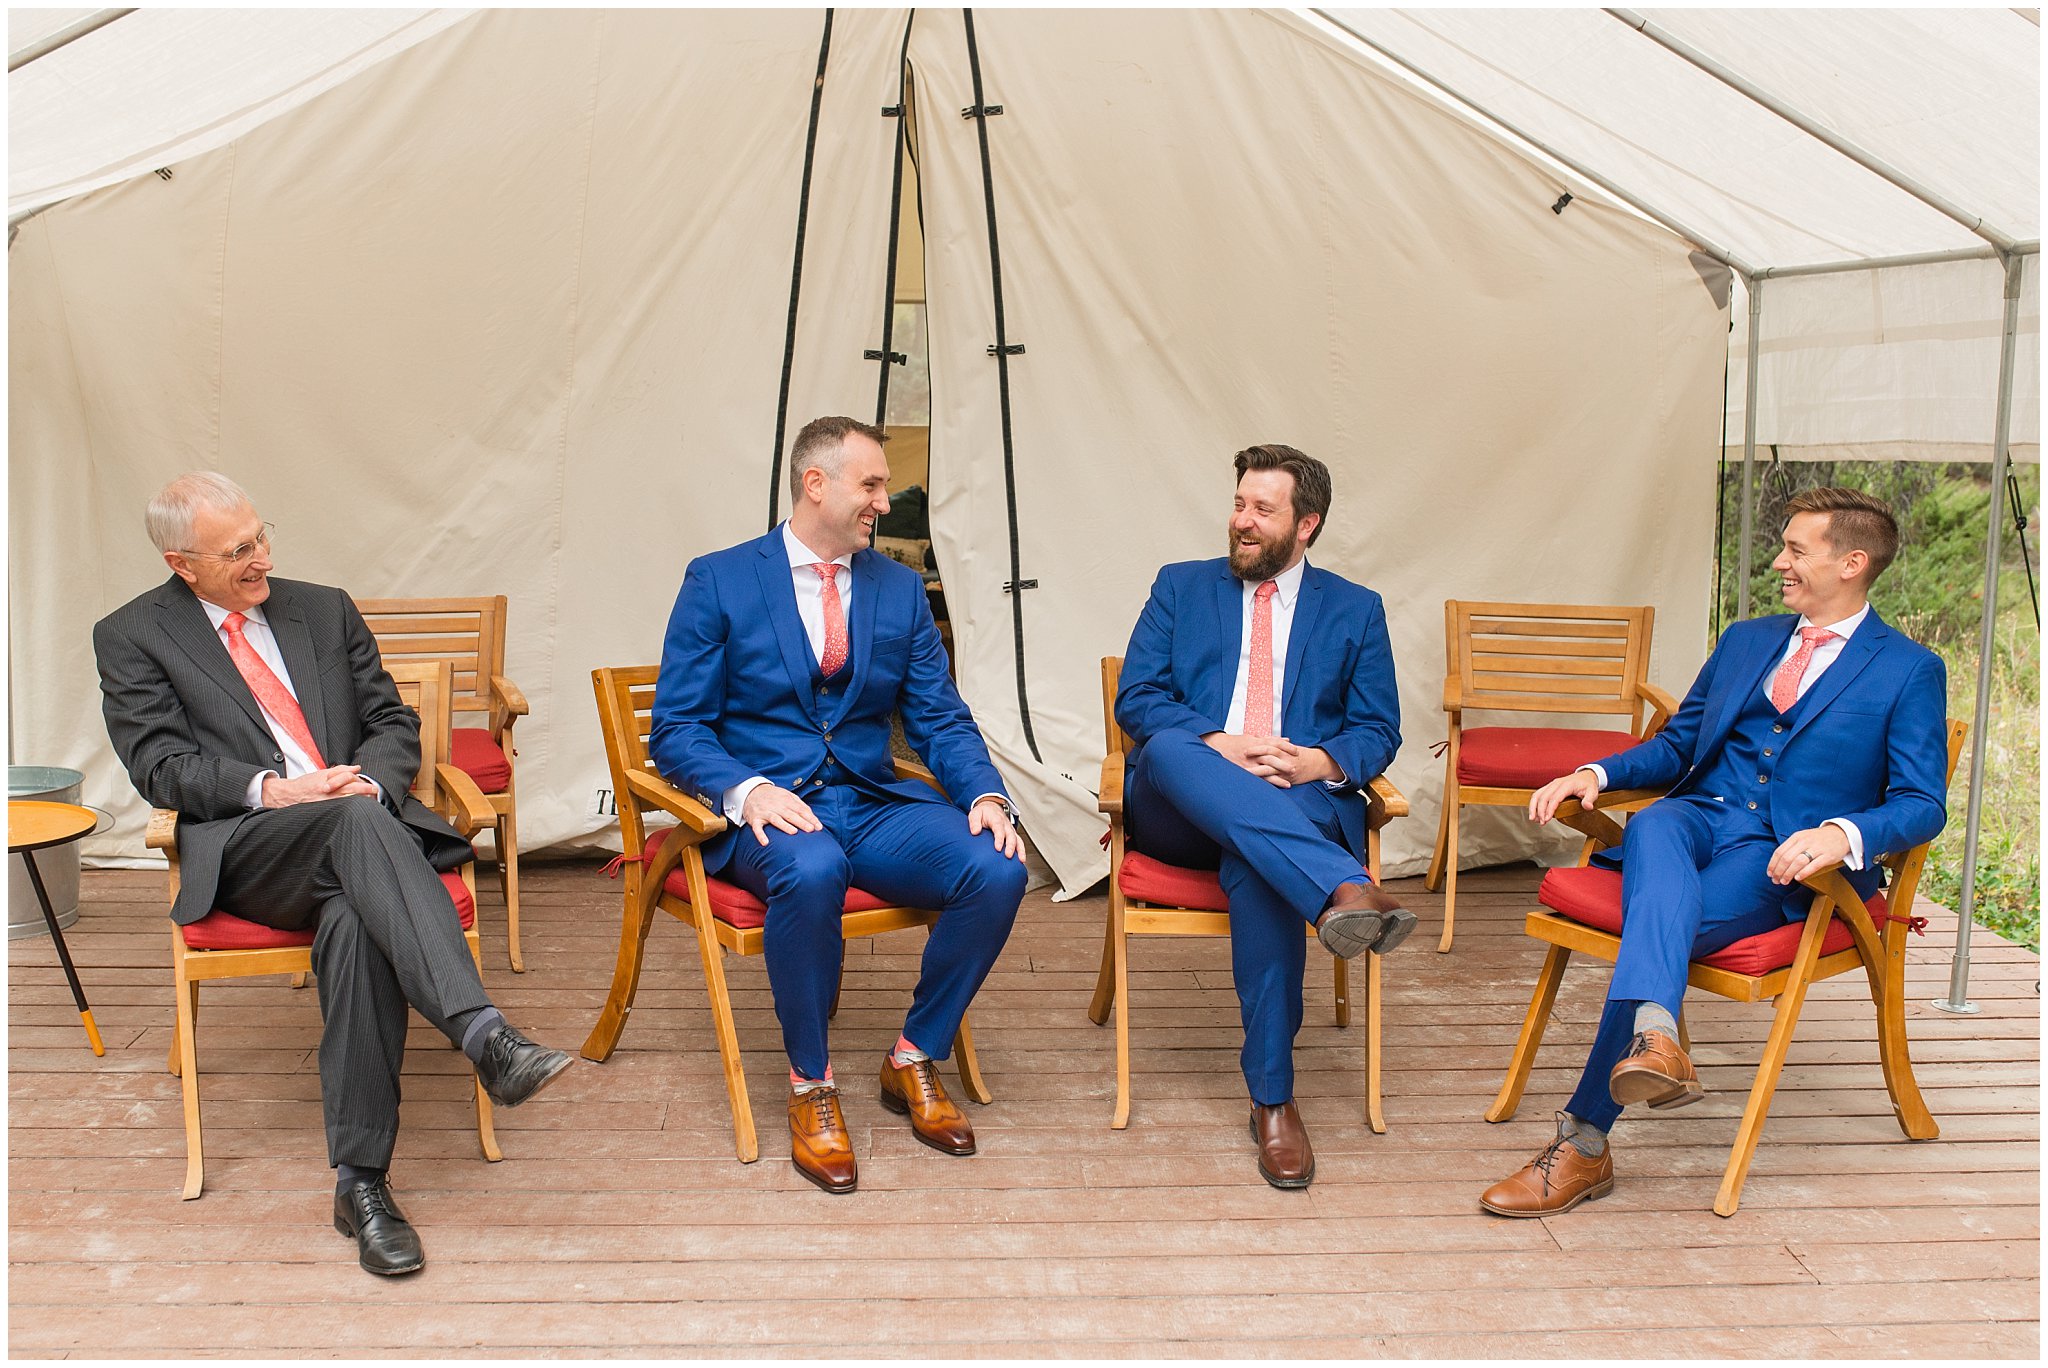 Groom and groomsmen getting ready outside canvas tent | Mountainside Weddings Kalispell Montana Destination Wedding | Jessie and Dallin Photography